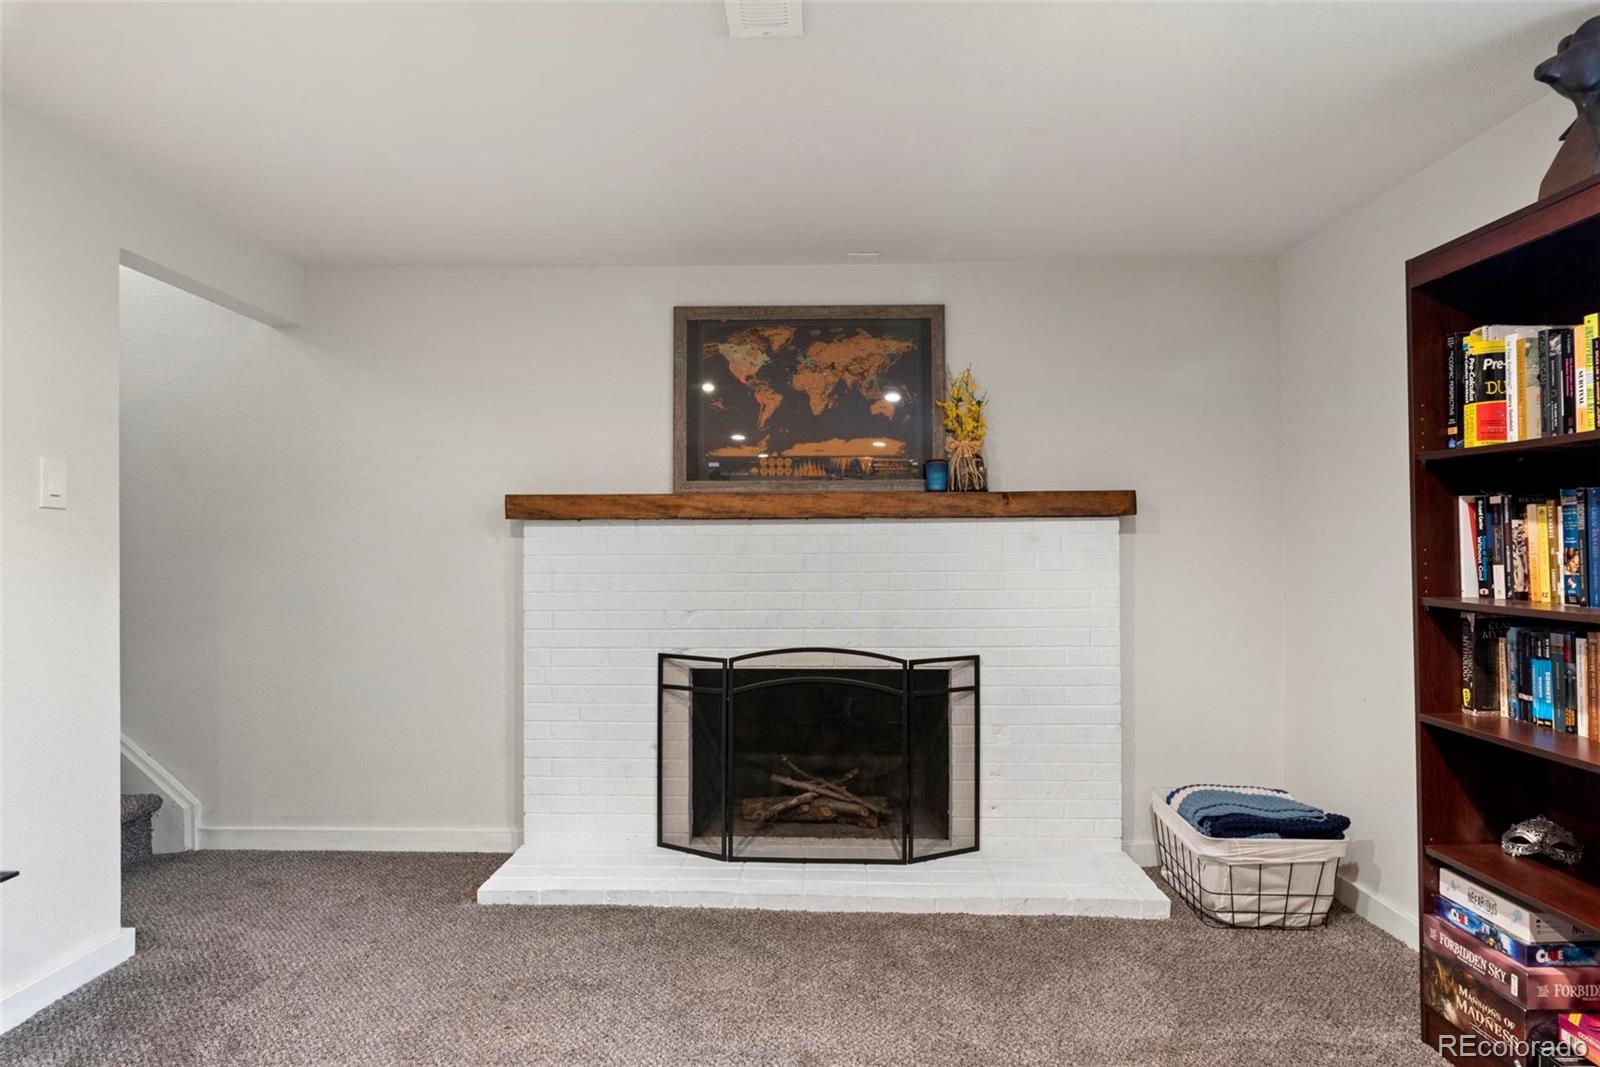 6316 71st, Arvada, CO